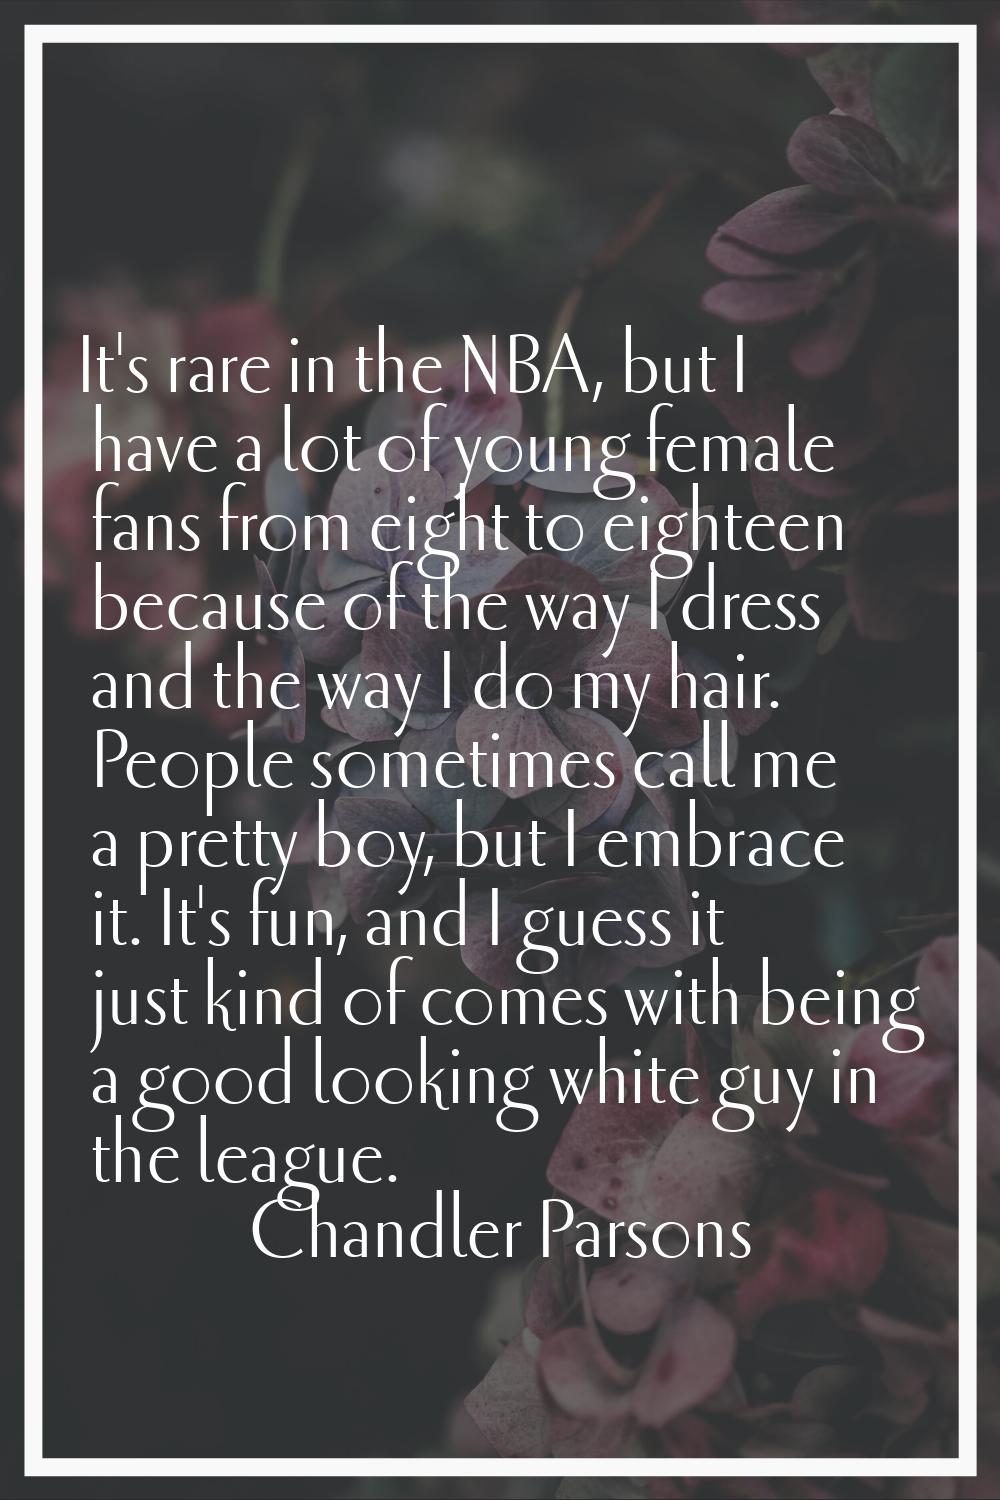 It's rare in the NBA, but I have a lot of young female fans from eight to eighteen because of the w